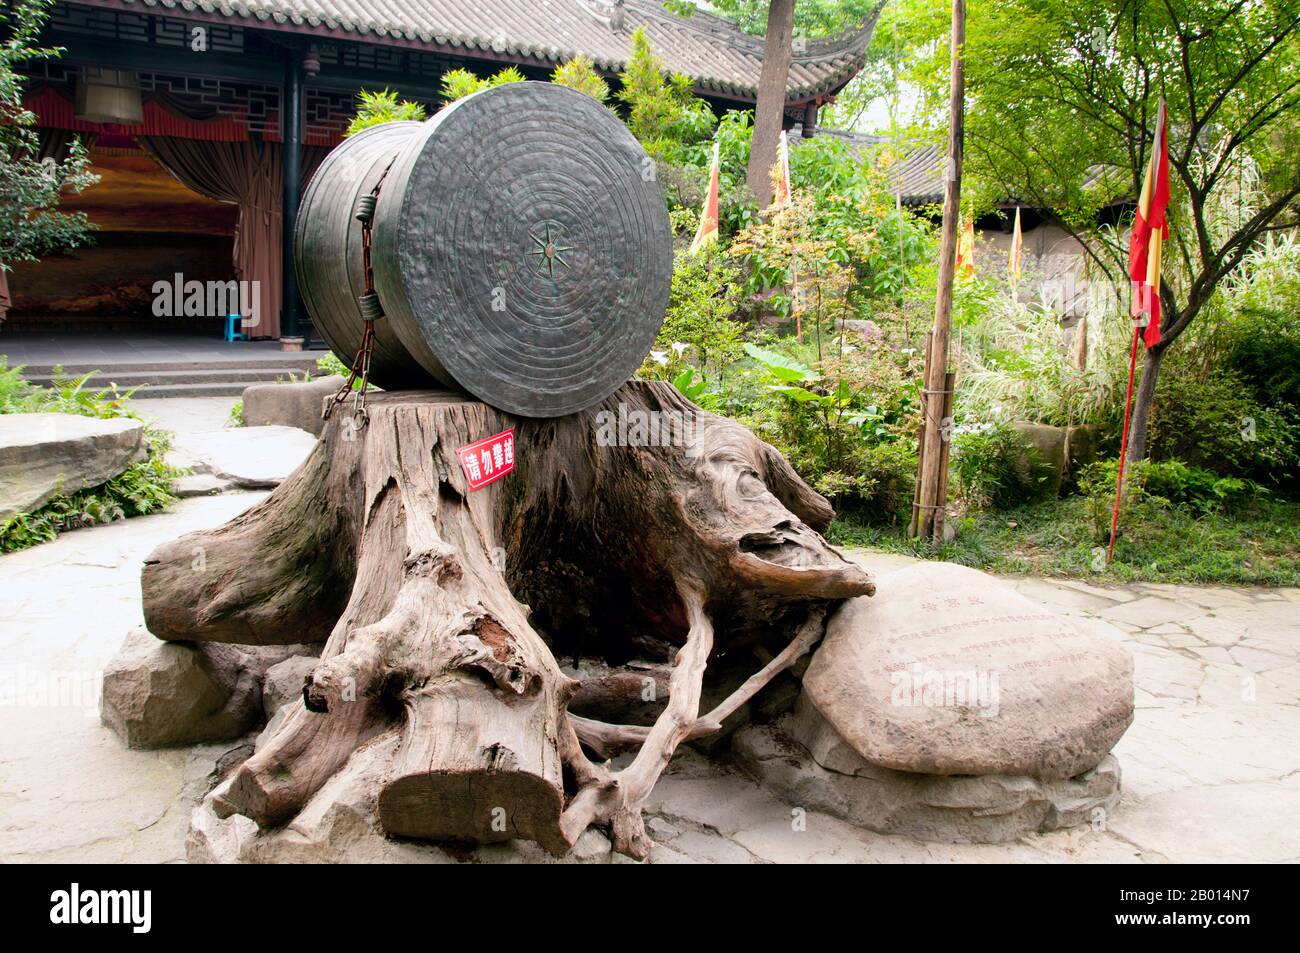 China: Rare bronze drum, Wuhou Ci (Wuhou Ancestral or Memorial Hall), Chengdu, Sichuan Province.  Wuhou Ci is dedicated to Zhuge Liang, hero of the classic 'The Romance of the Three Kingdoms' and his emperor, Liu Bei. Zhuge Liang (181–234) was a chancellor of Shu Han during the Three Kingdoms period of Chinese history. He is often recognised as the greatest and most accomplished strategist of his era.  Chengdu, known formerly as Chengtu, is the capital of Sichuan province in Southwest China. Stock Photo